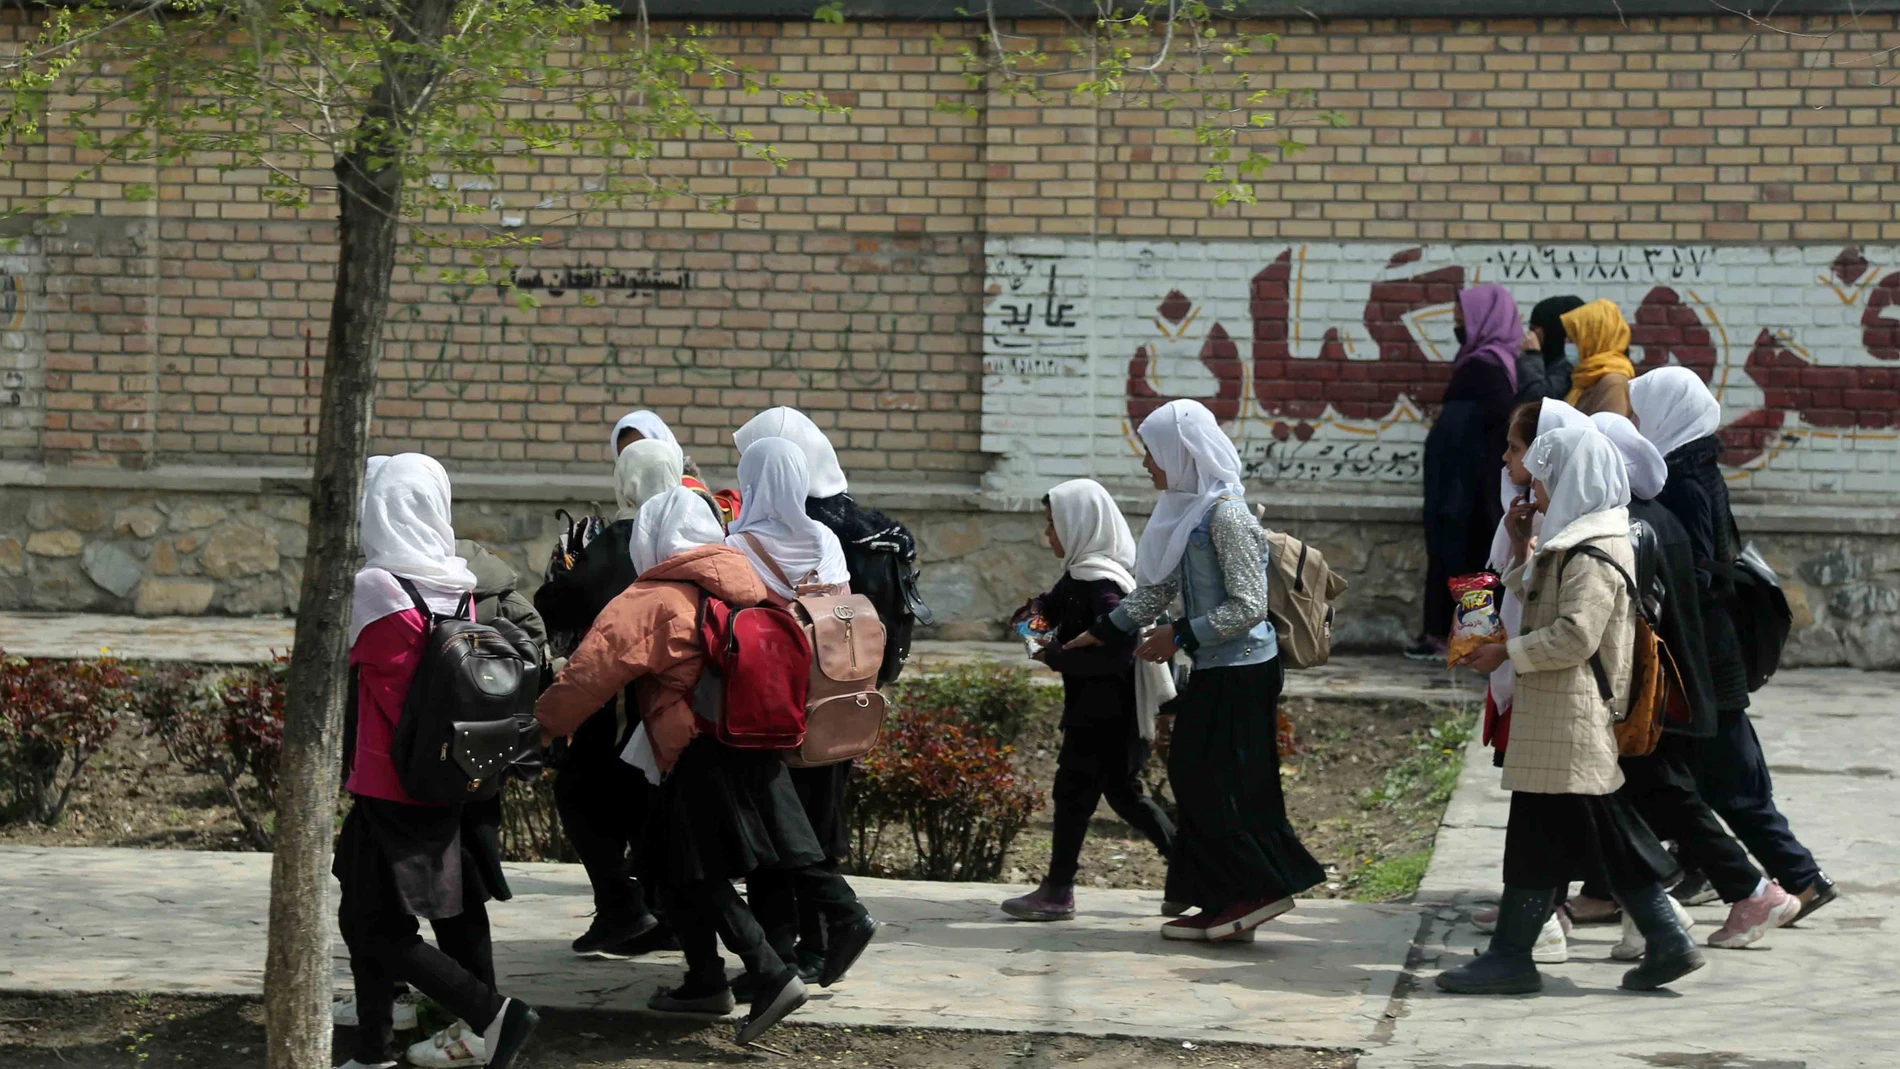 Kabul (Afghanistan), 05/06/2023.- Afghan school girls leave their school for the day in Kabul, Afghanistan, 05 June 2023. Nearly 80 girls were 'poisoned' and hospitalized in two separate attacks on primary schools in Sar-e-Pul province, northern Afghanistan over the weekend, according to the provincial education department. The person who orchestrated the poisoning had a 'personal grudge', according to a local education official, but did not elaborate further. The investigation into the incid...